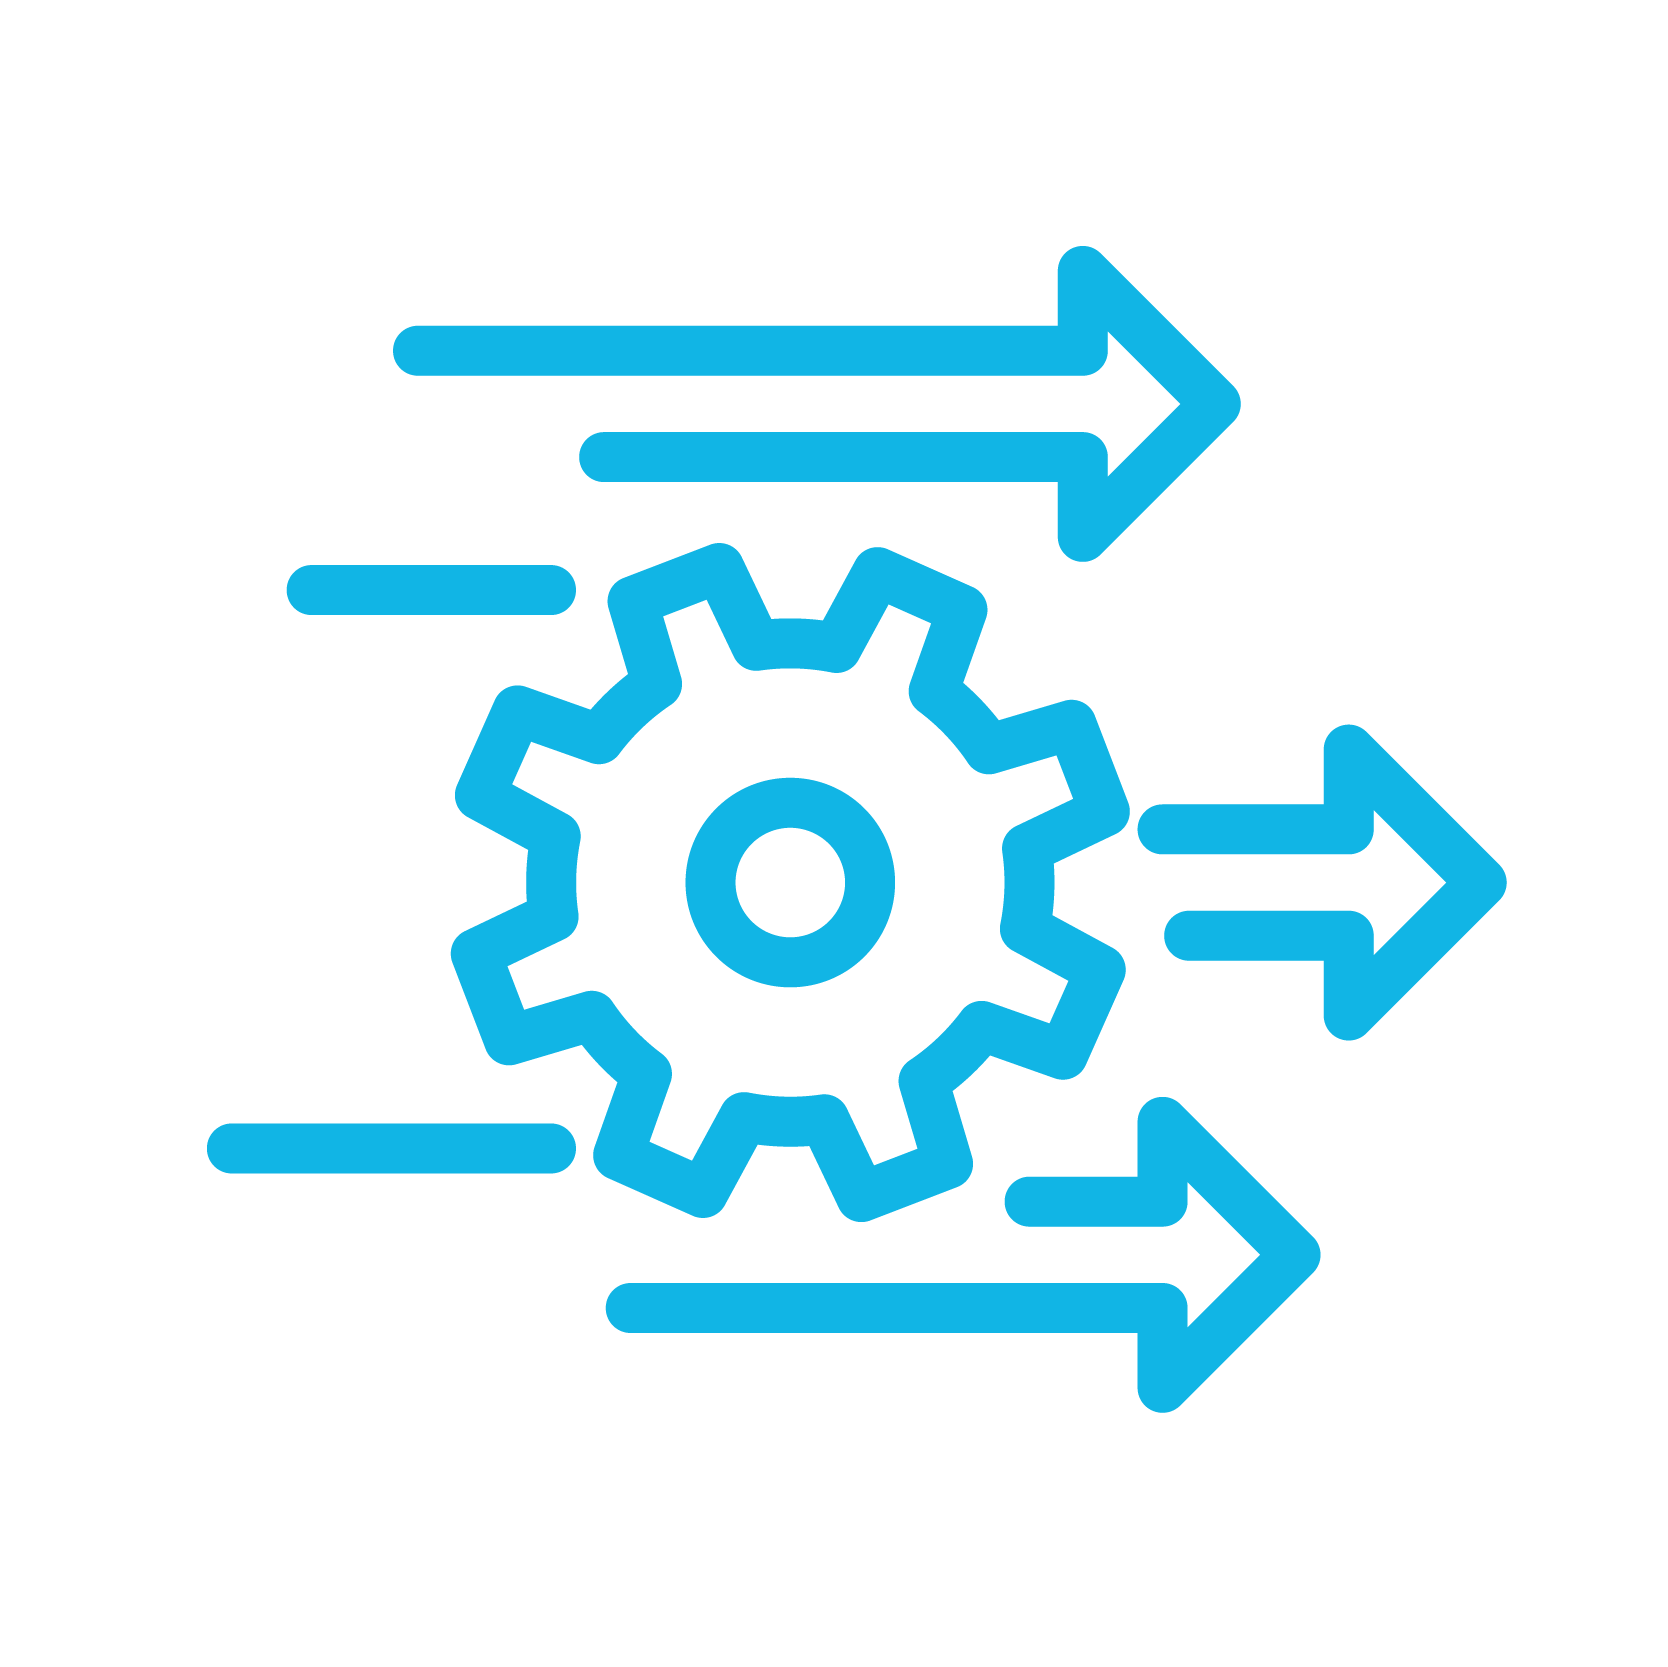 An icon of arrows speeding past a gear, representing how HammerTech is able to integrate with other tools for cohesive data management.